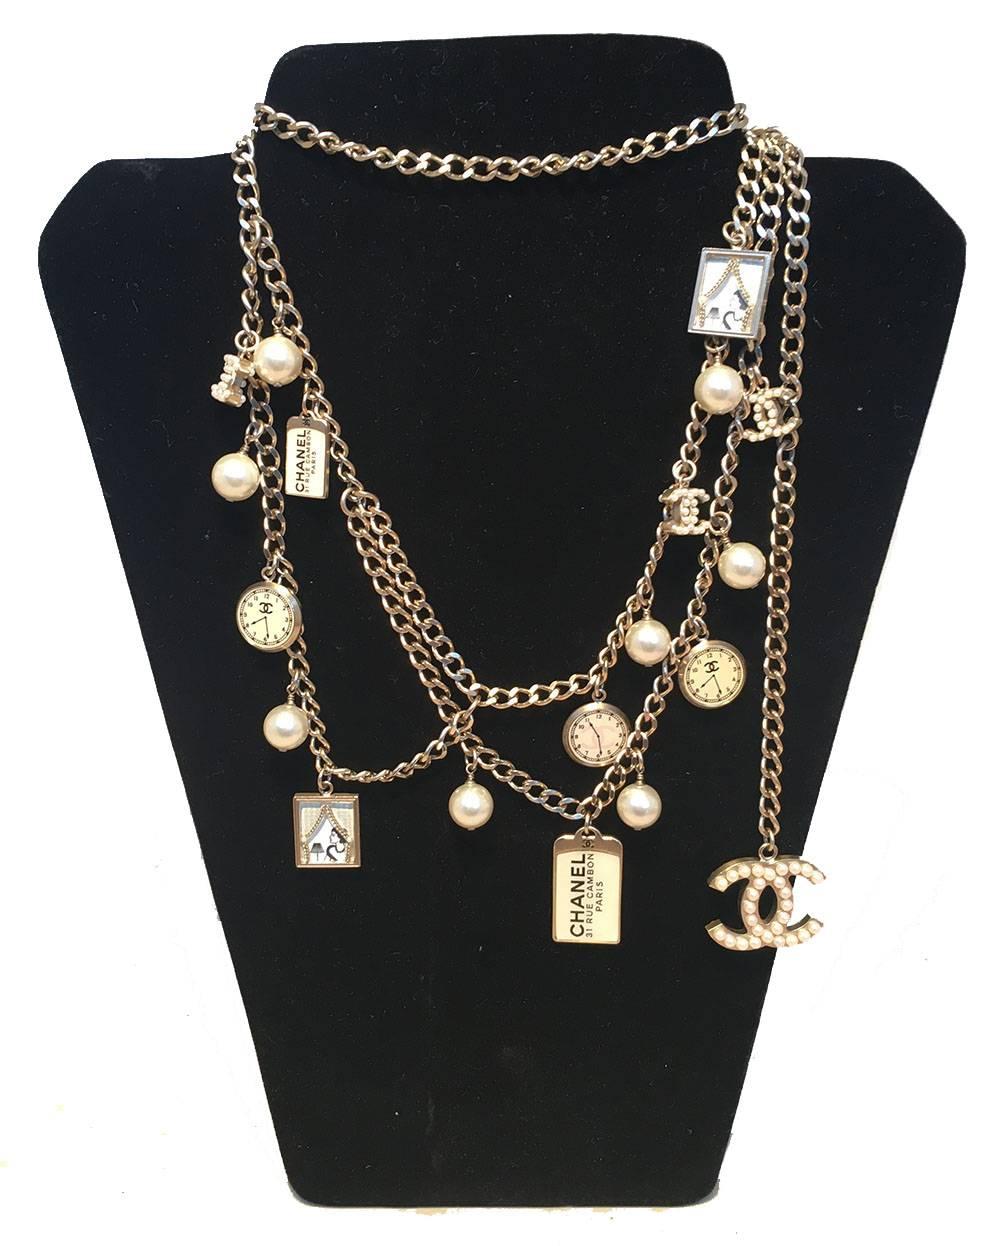 AMAZING Chanel silver charm belt necklace in excellent condition.  Silver chain with 8 drop pearls, 3 mini CC pearl logo charms, 3 clock charms, 2 square woman in window photo charms, and 2 Chanel rue cambon dog tag charms (one small, one large).